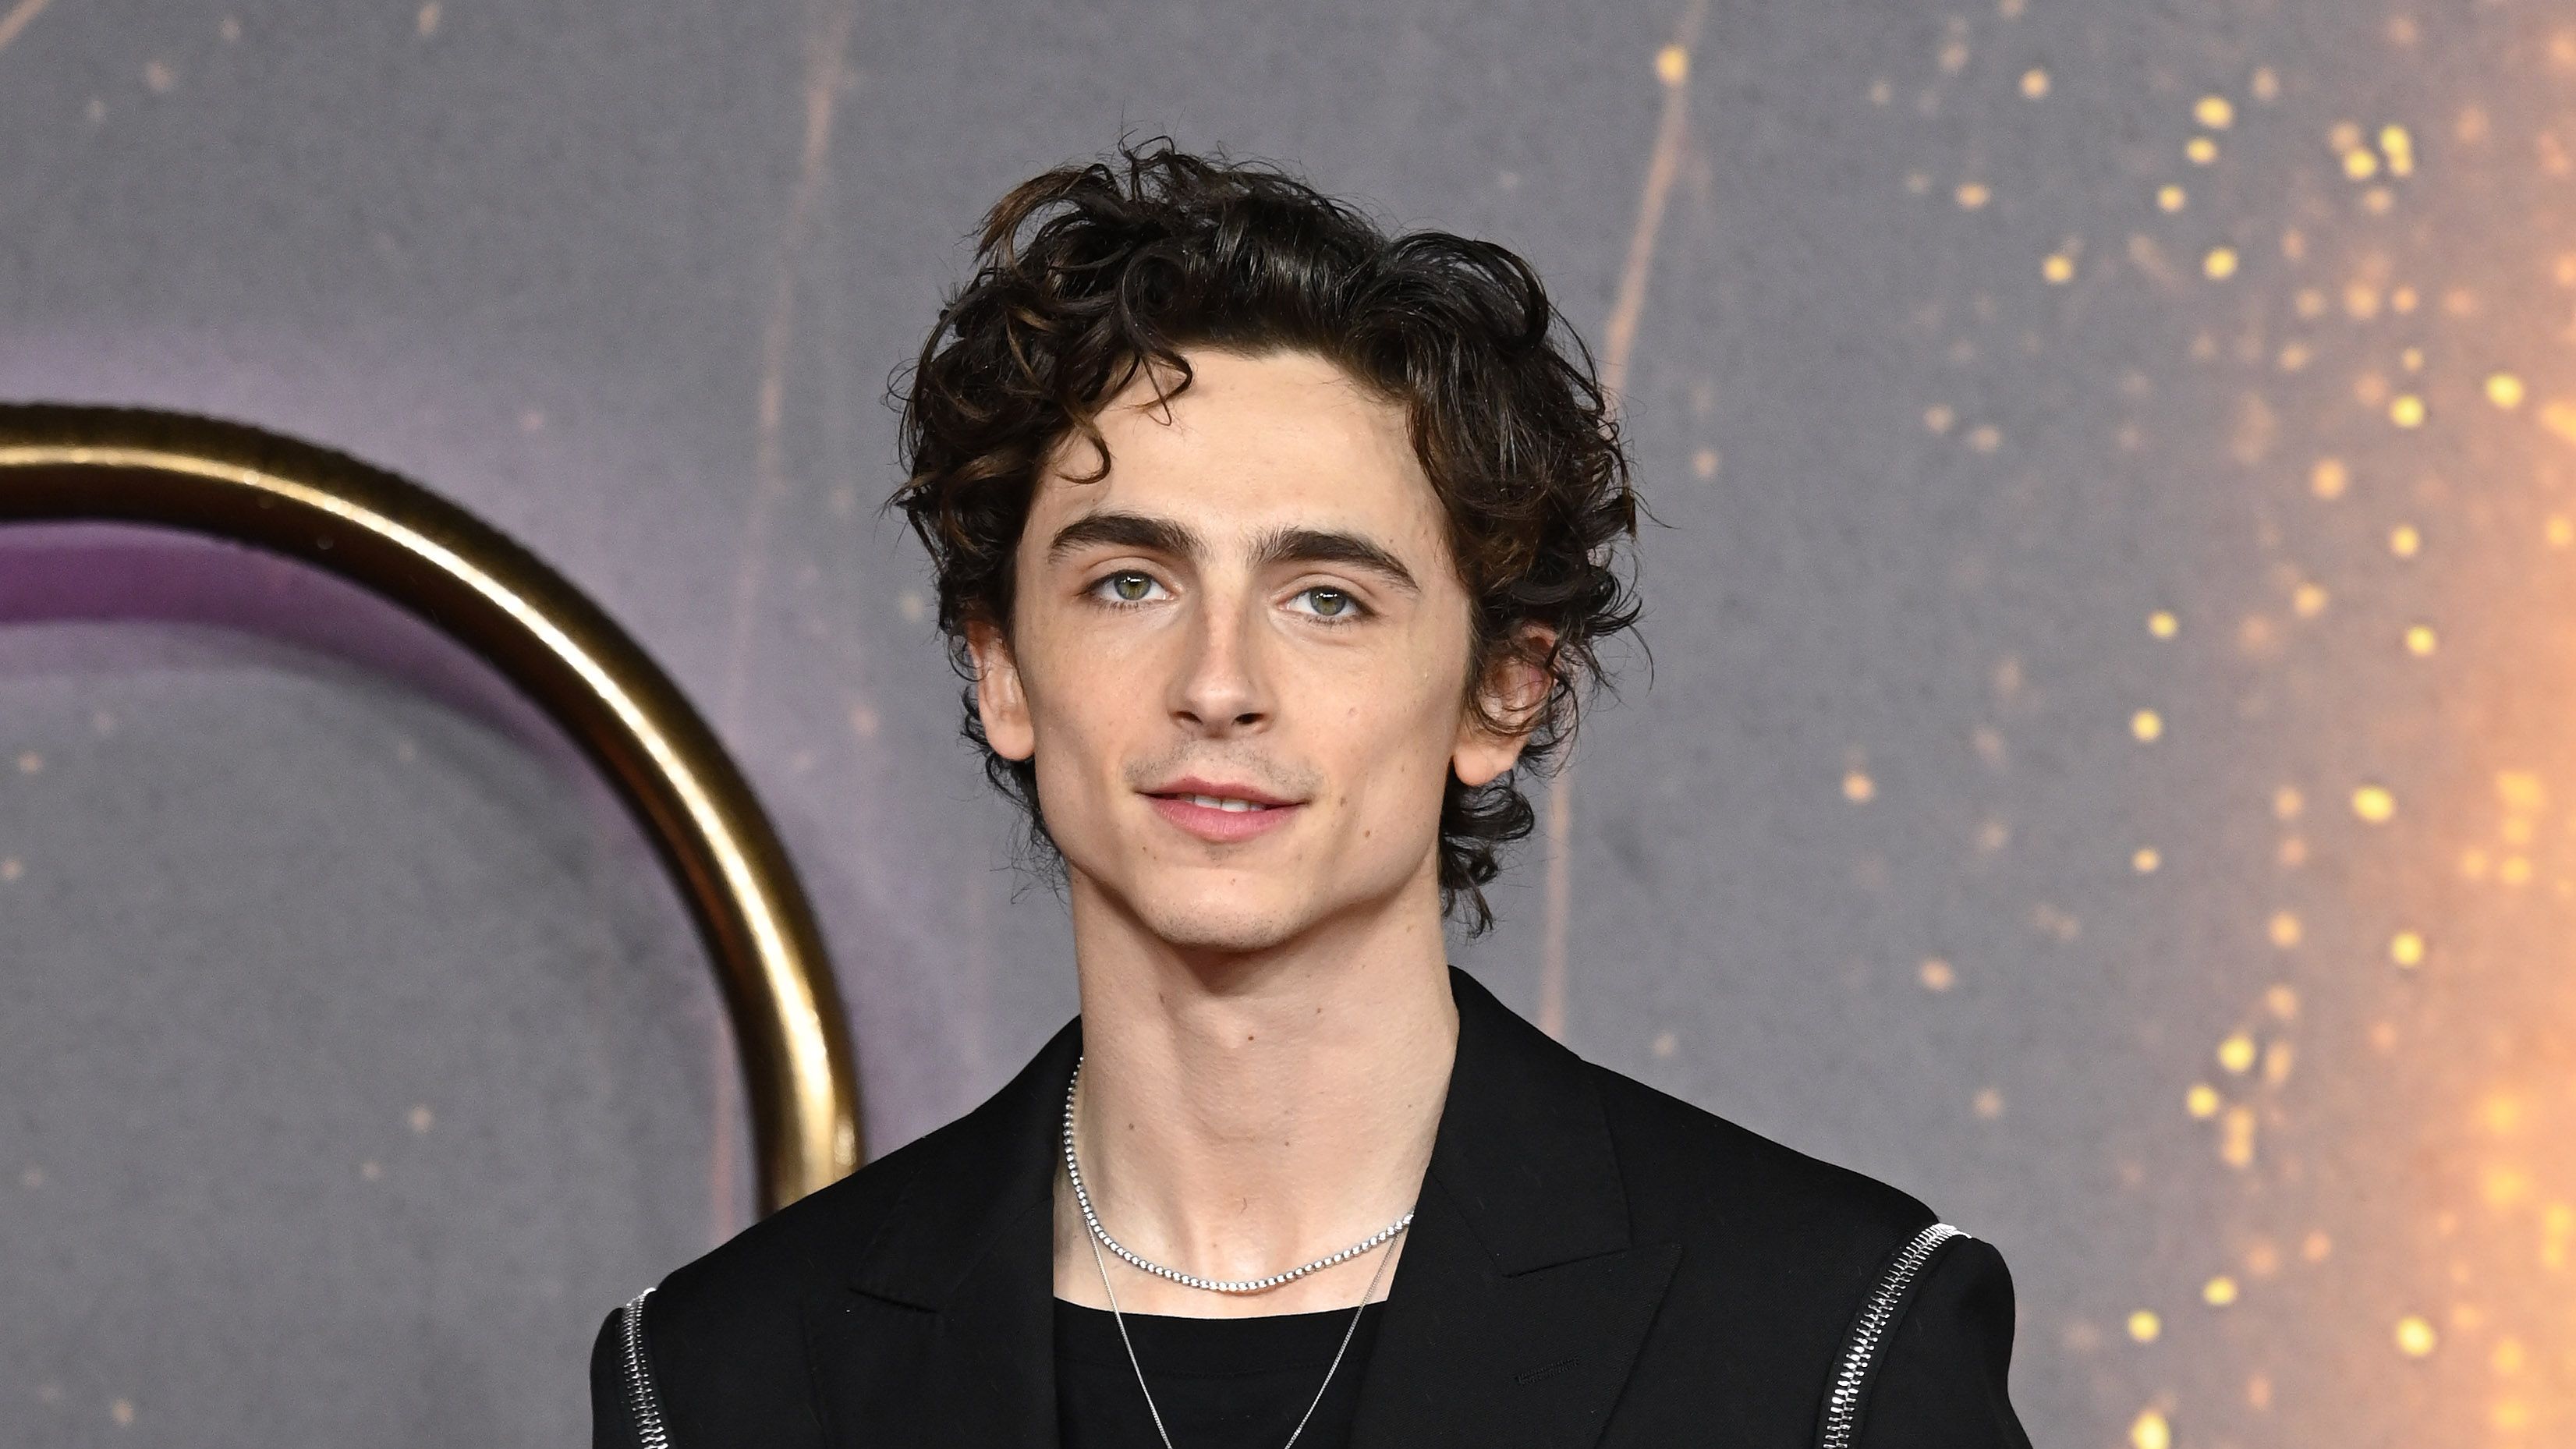 Timothée Chalamet's Dating History - Who Is Timothée Chalamet Dating?